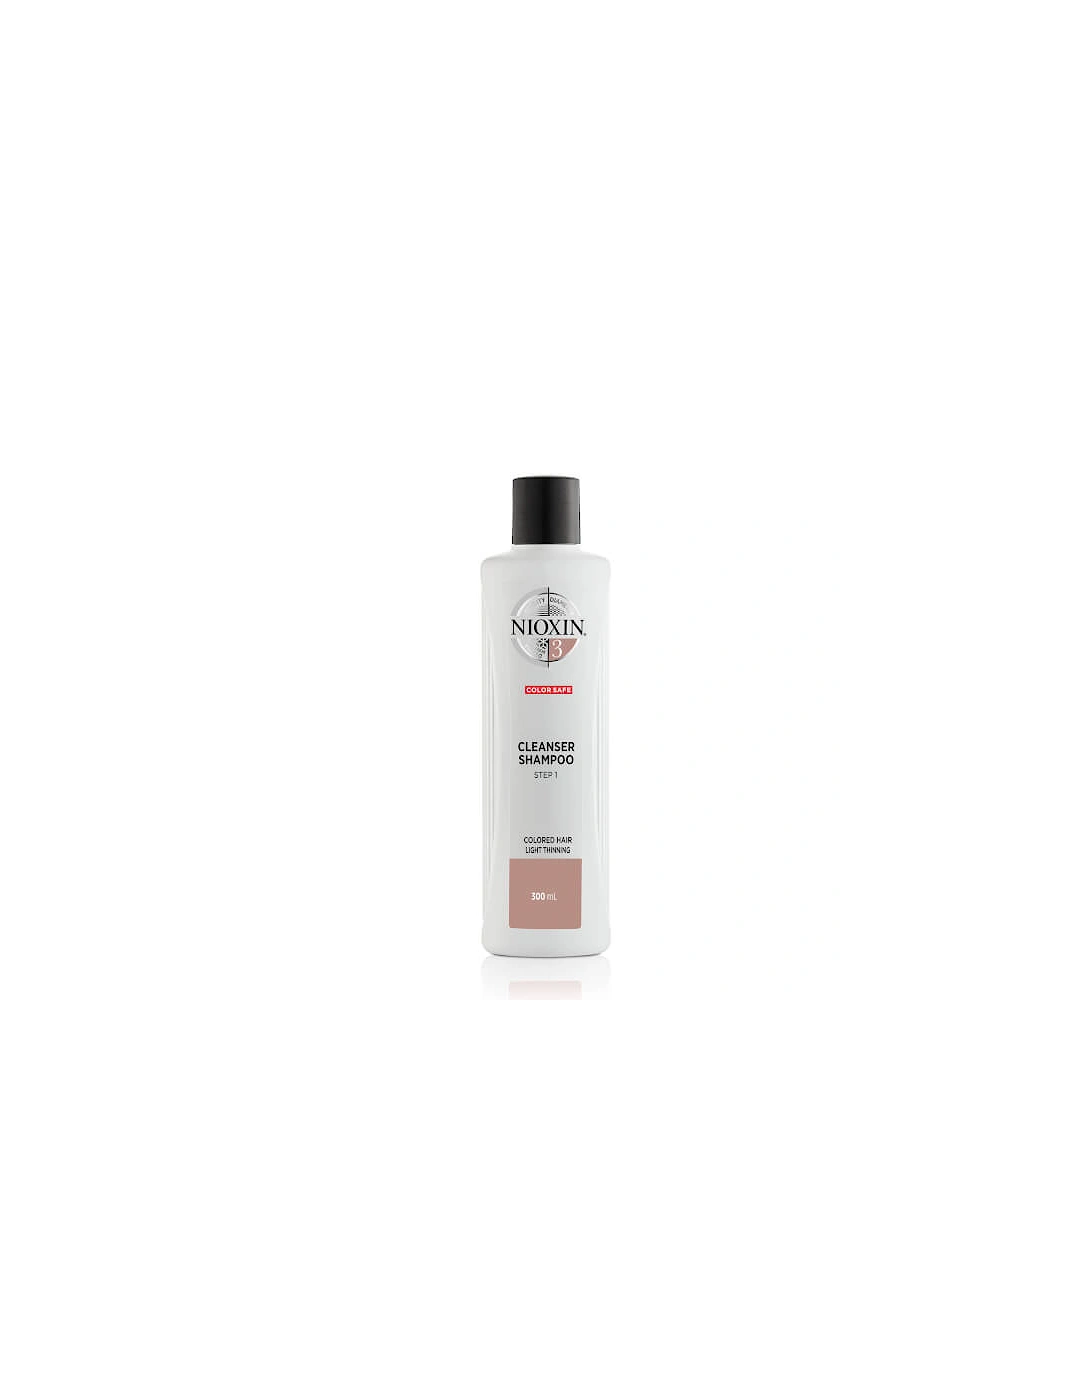 3-Part System 3 Cleanser Shampoo for Coloured Hair with Light Thinning 300ml - NIOXIN, 2 of 1